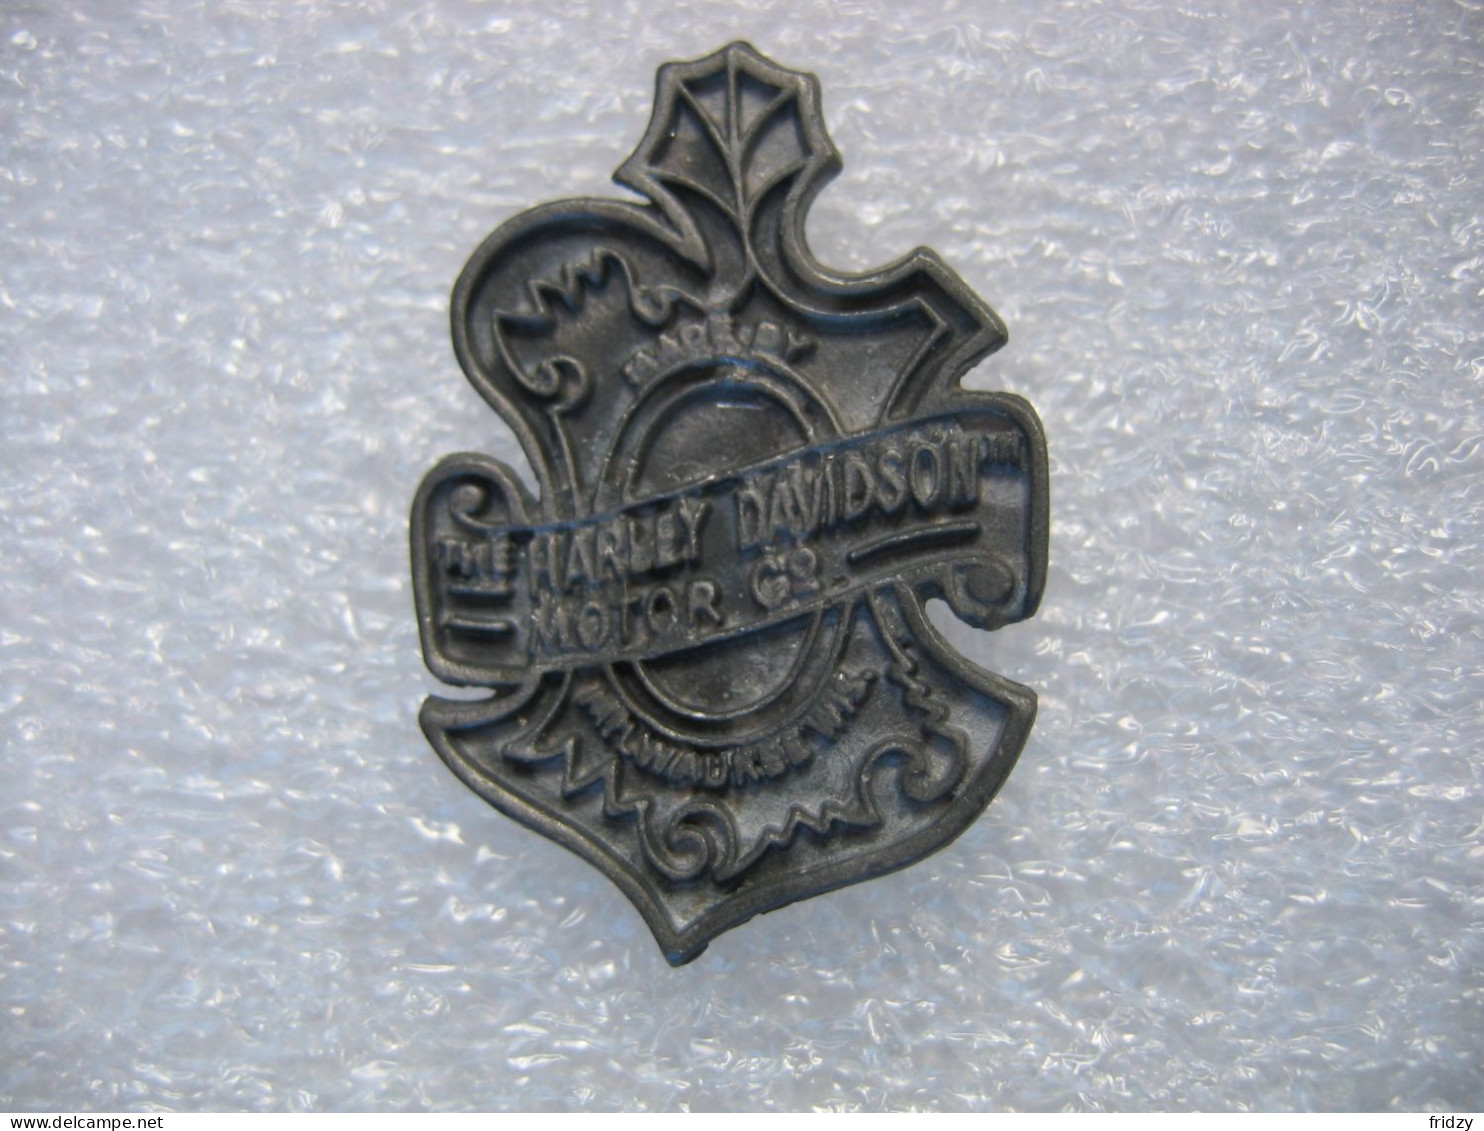 Pin's à 2 Attaches Et En étain. "The Harlay Davidson Motor And Cie". Made By Milwauree Wis - Motos